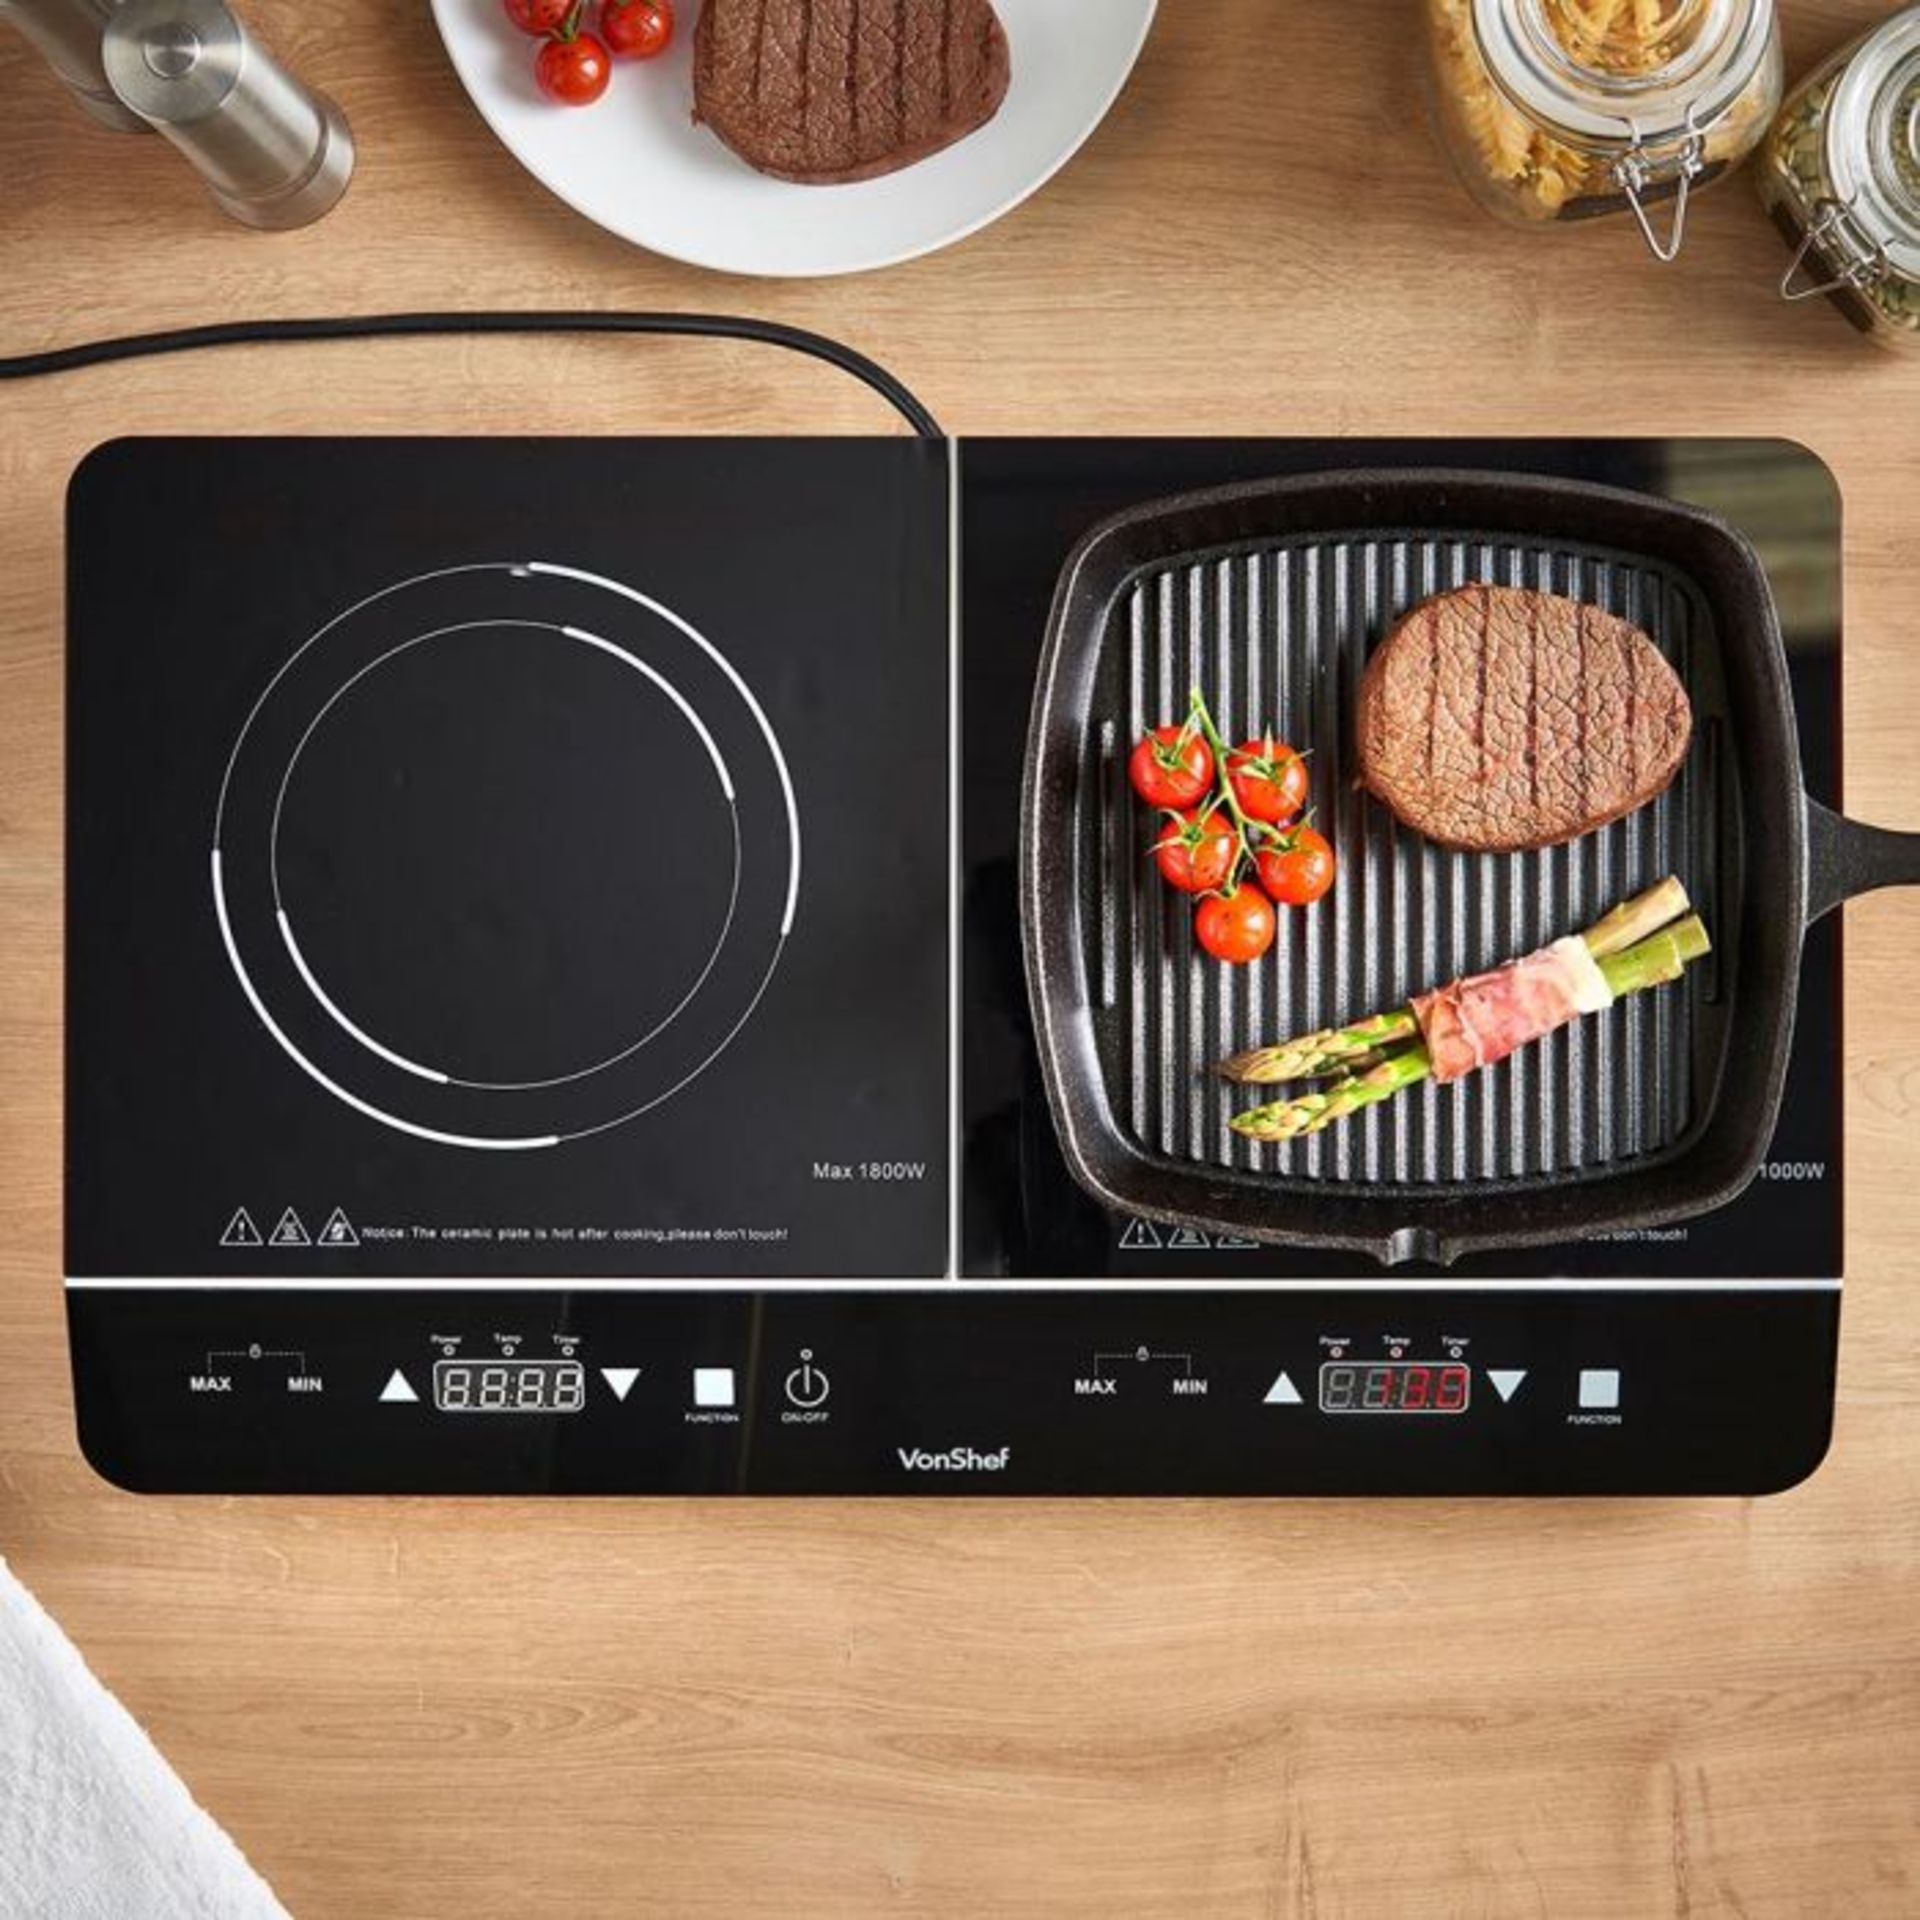 (S313) Twin Digital Induction Hob Compact and portable, the ceramic induction hob from VonShef... - Image 3 of 3